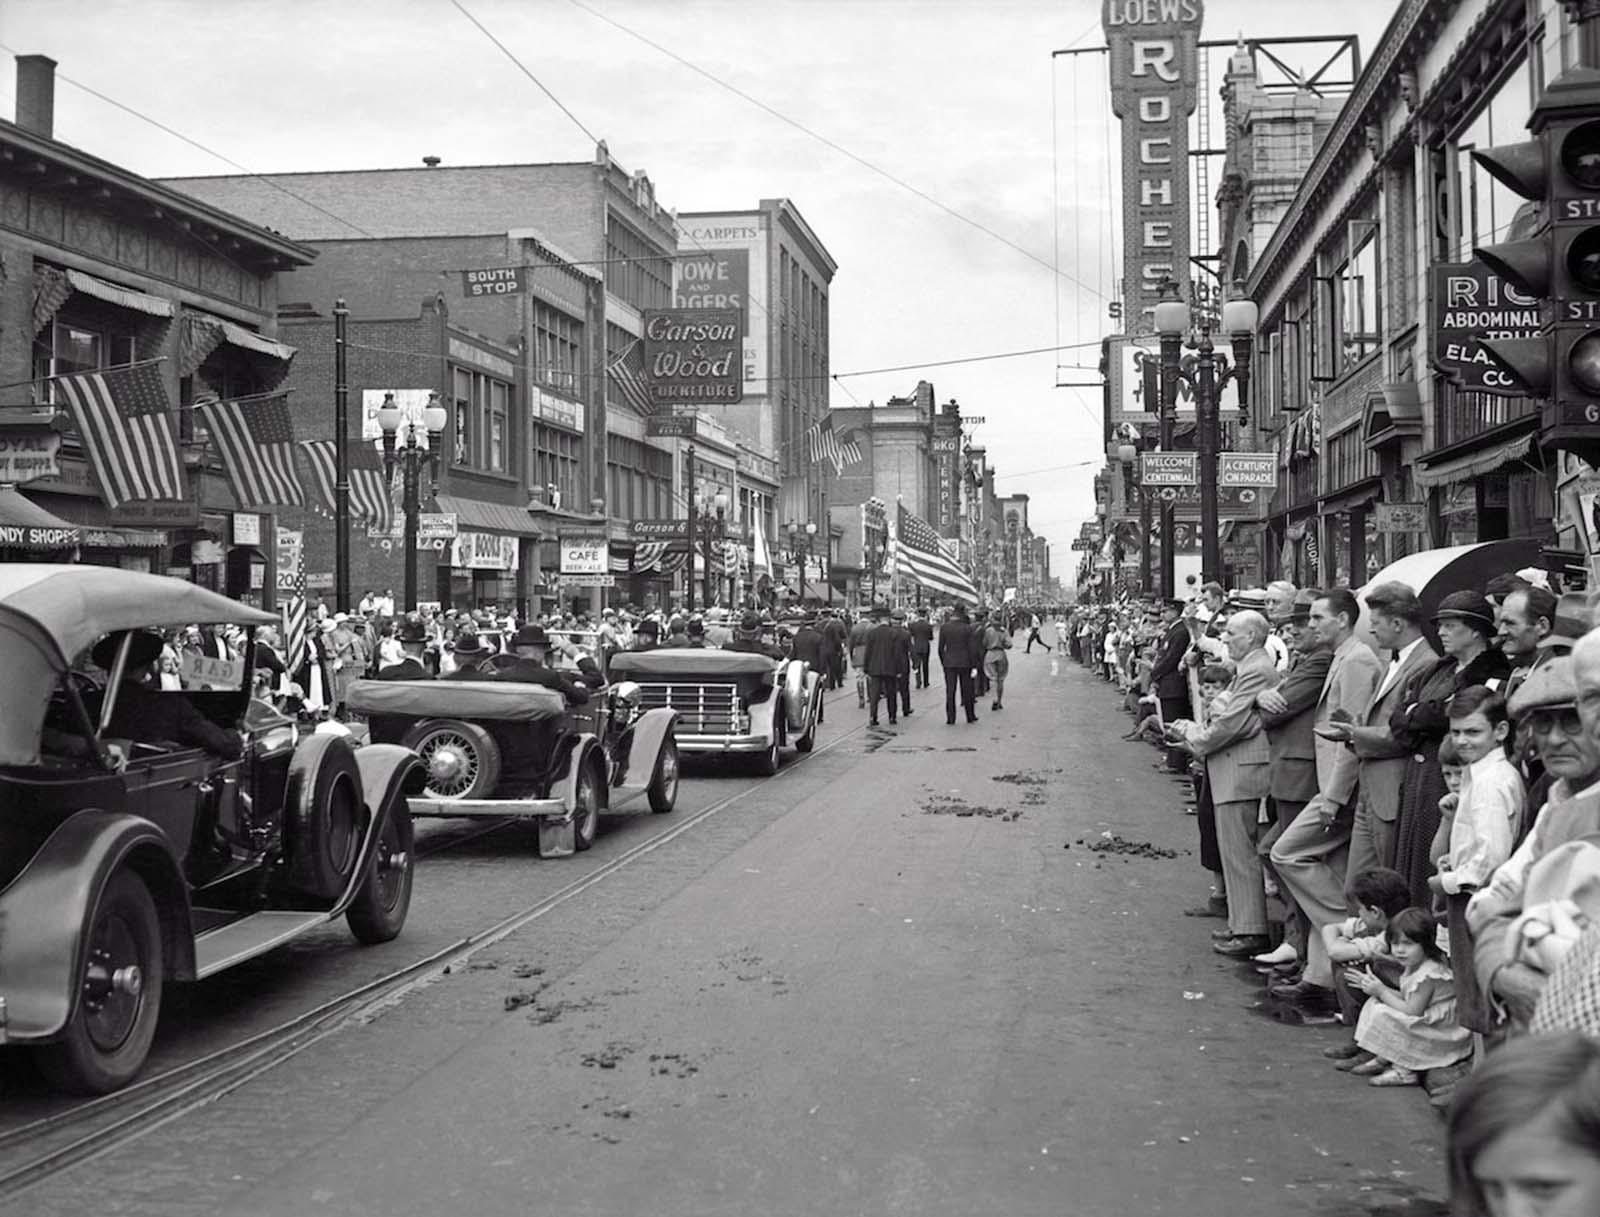 Rochester, New York — The Grand Army of the Republic Civil War Veterans join a parade down main street during Rochester’s centennial. 1934.